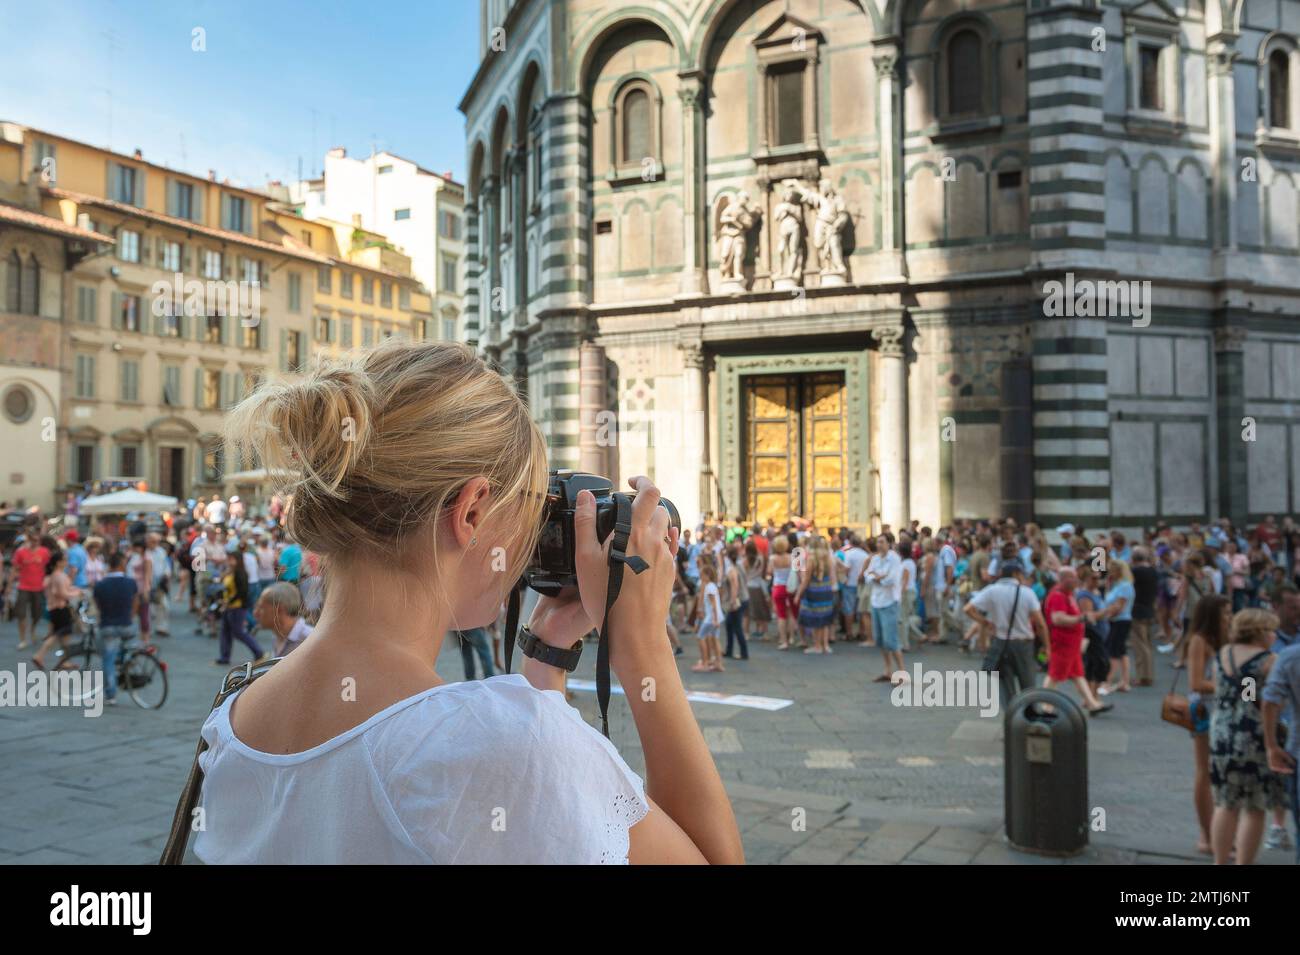 Female taking photo, rear view of a young woman with a camera taking a picture of the Renaissance-era Baptistry building in Florence, Italy Stock Photo